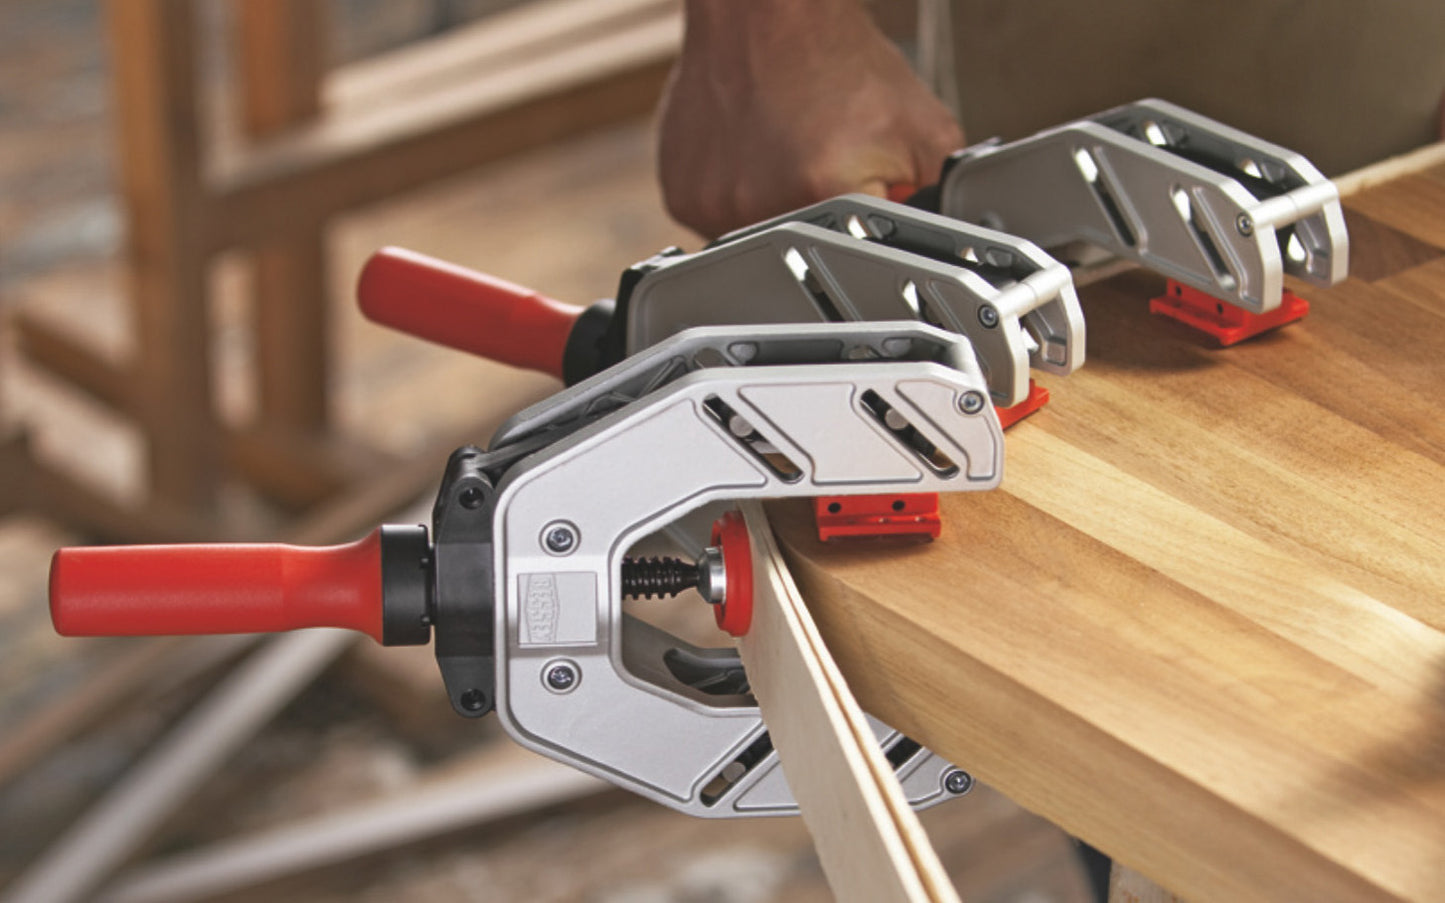 This Bessey One-Hand Edge Clamp EKT-55 is made of lightweight Aluminum construction which makes EKT the perfect tool to secure edge banding with just one hand & improve productivity. Two large non-slip, opposing, gentle jaws for positive grip. The jaws have a non-slip plastic coating for a solid grip. Made in Germany 